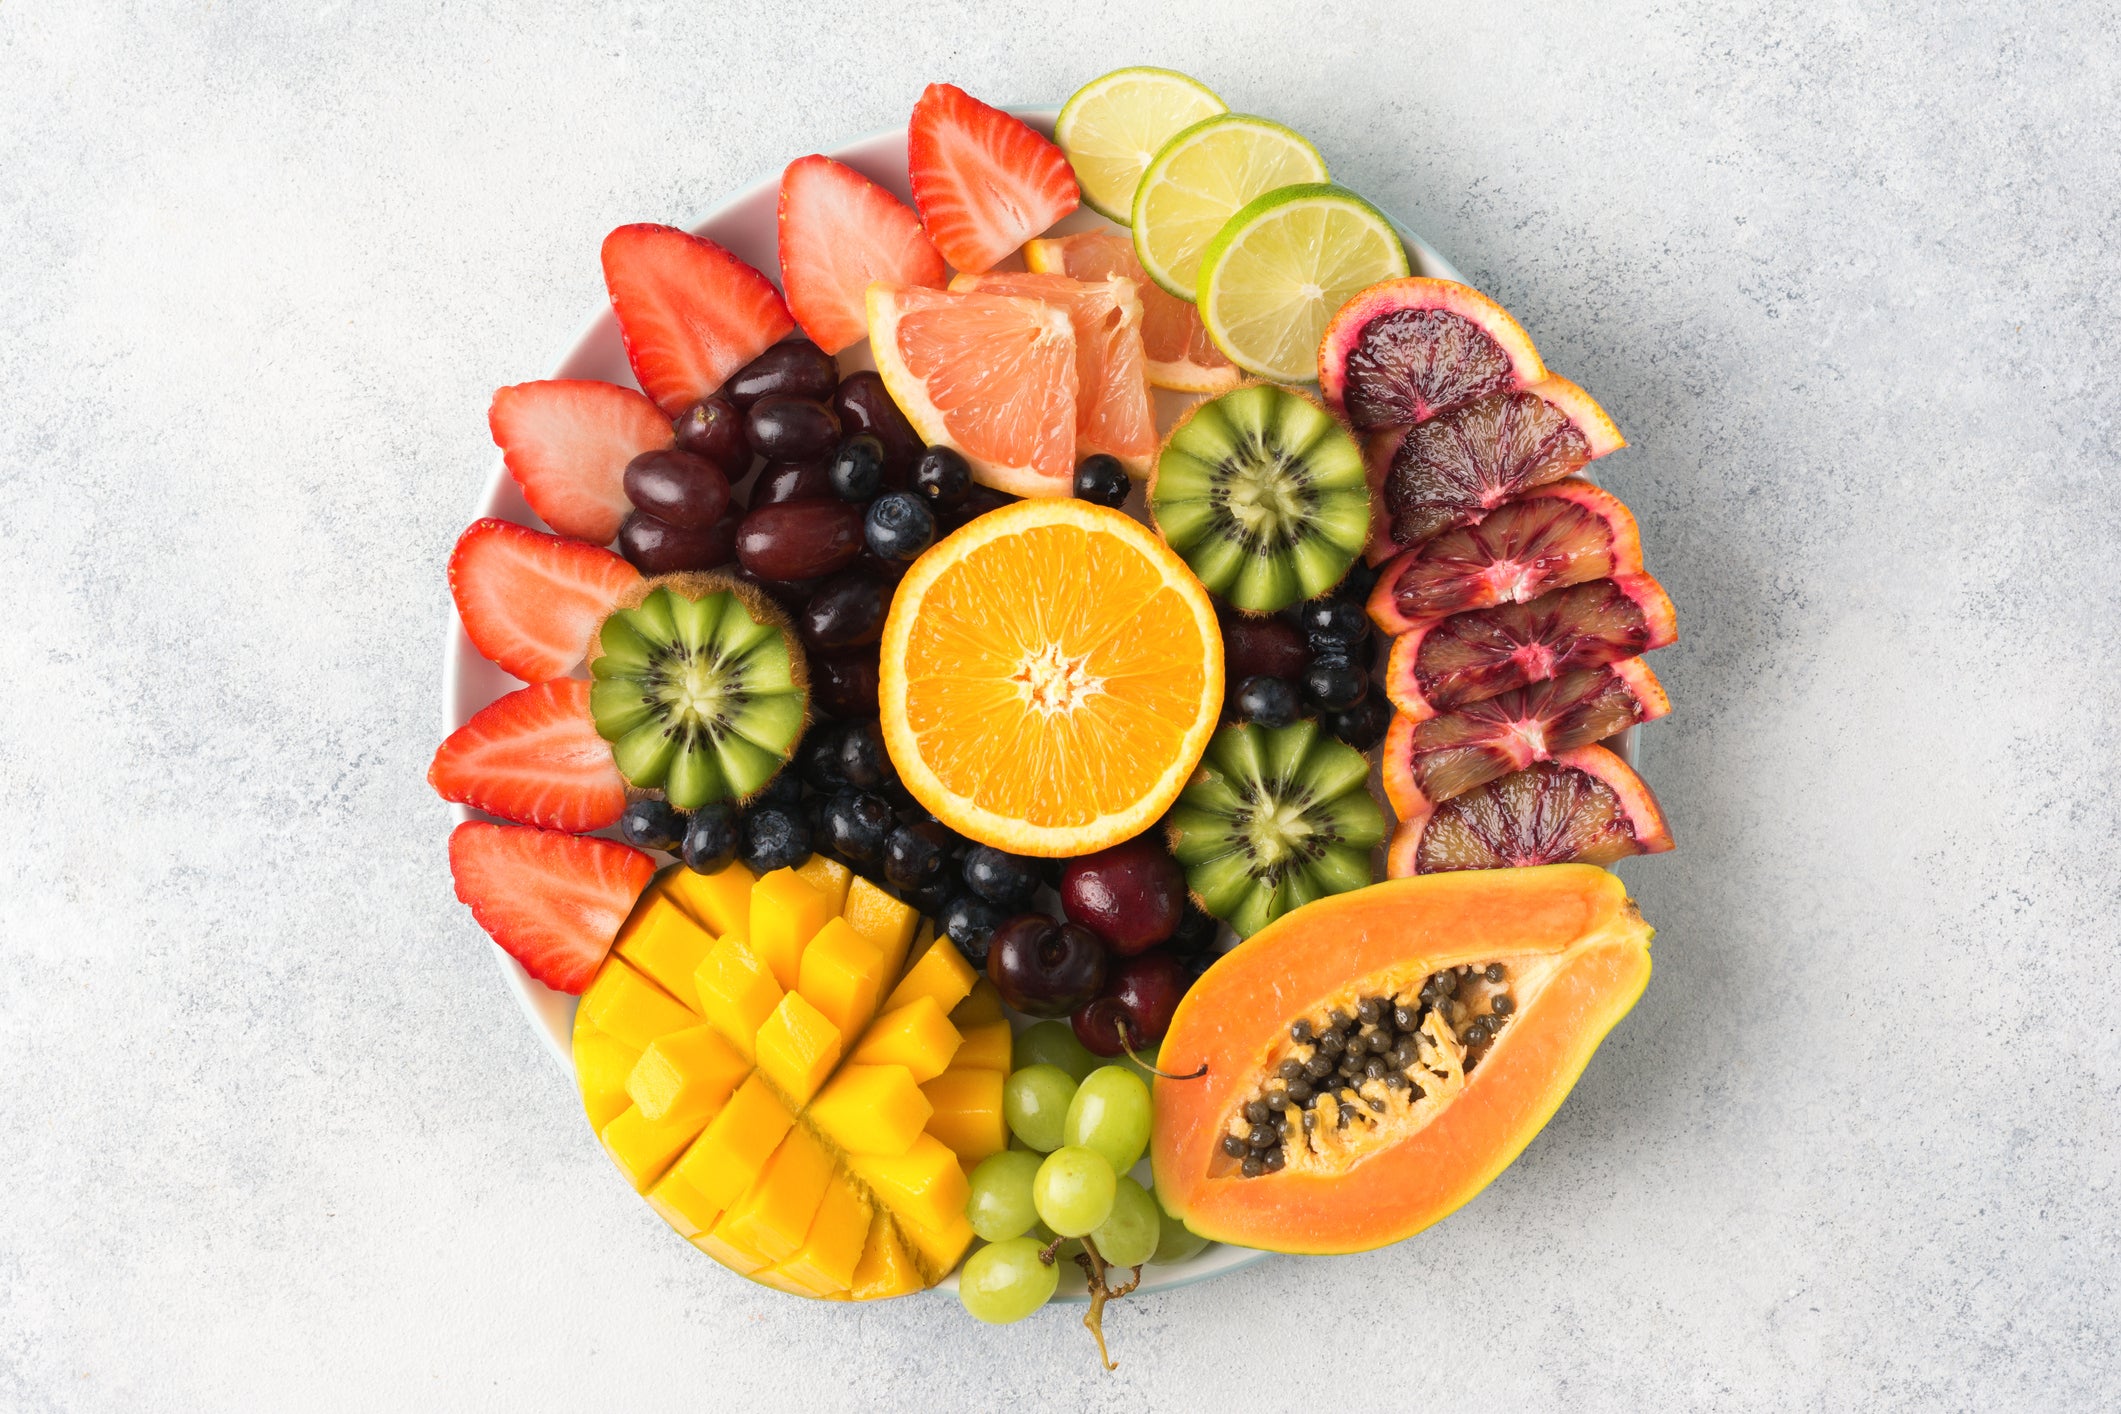 Fill up on fruits to get a variety of essential nutrients